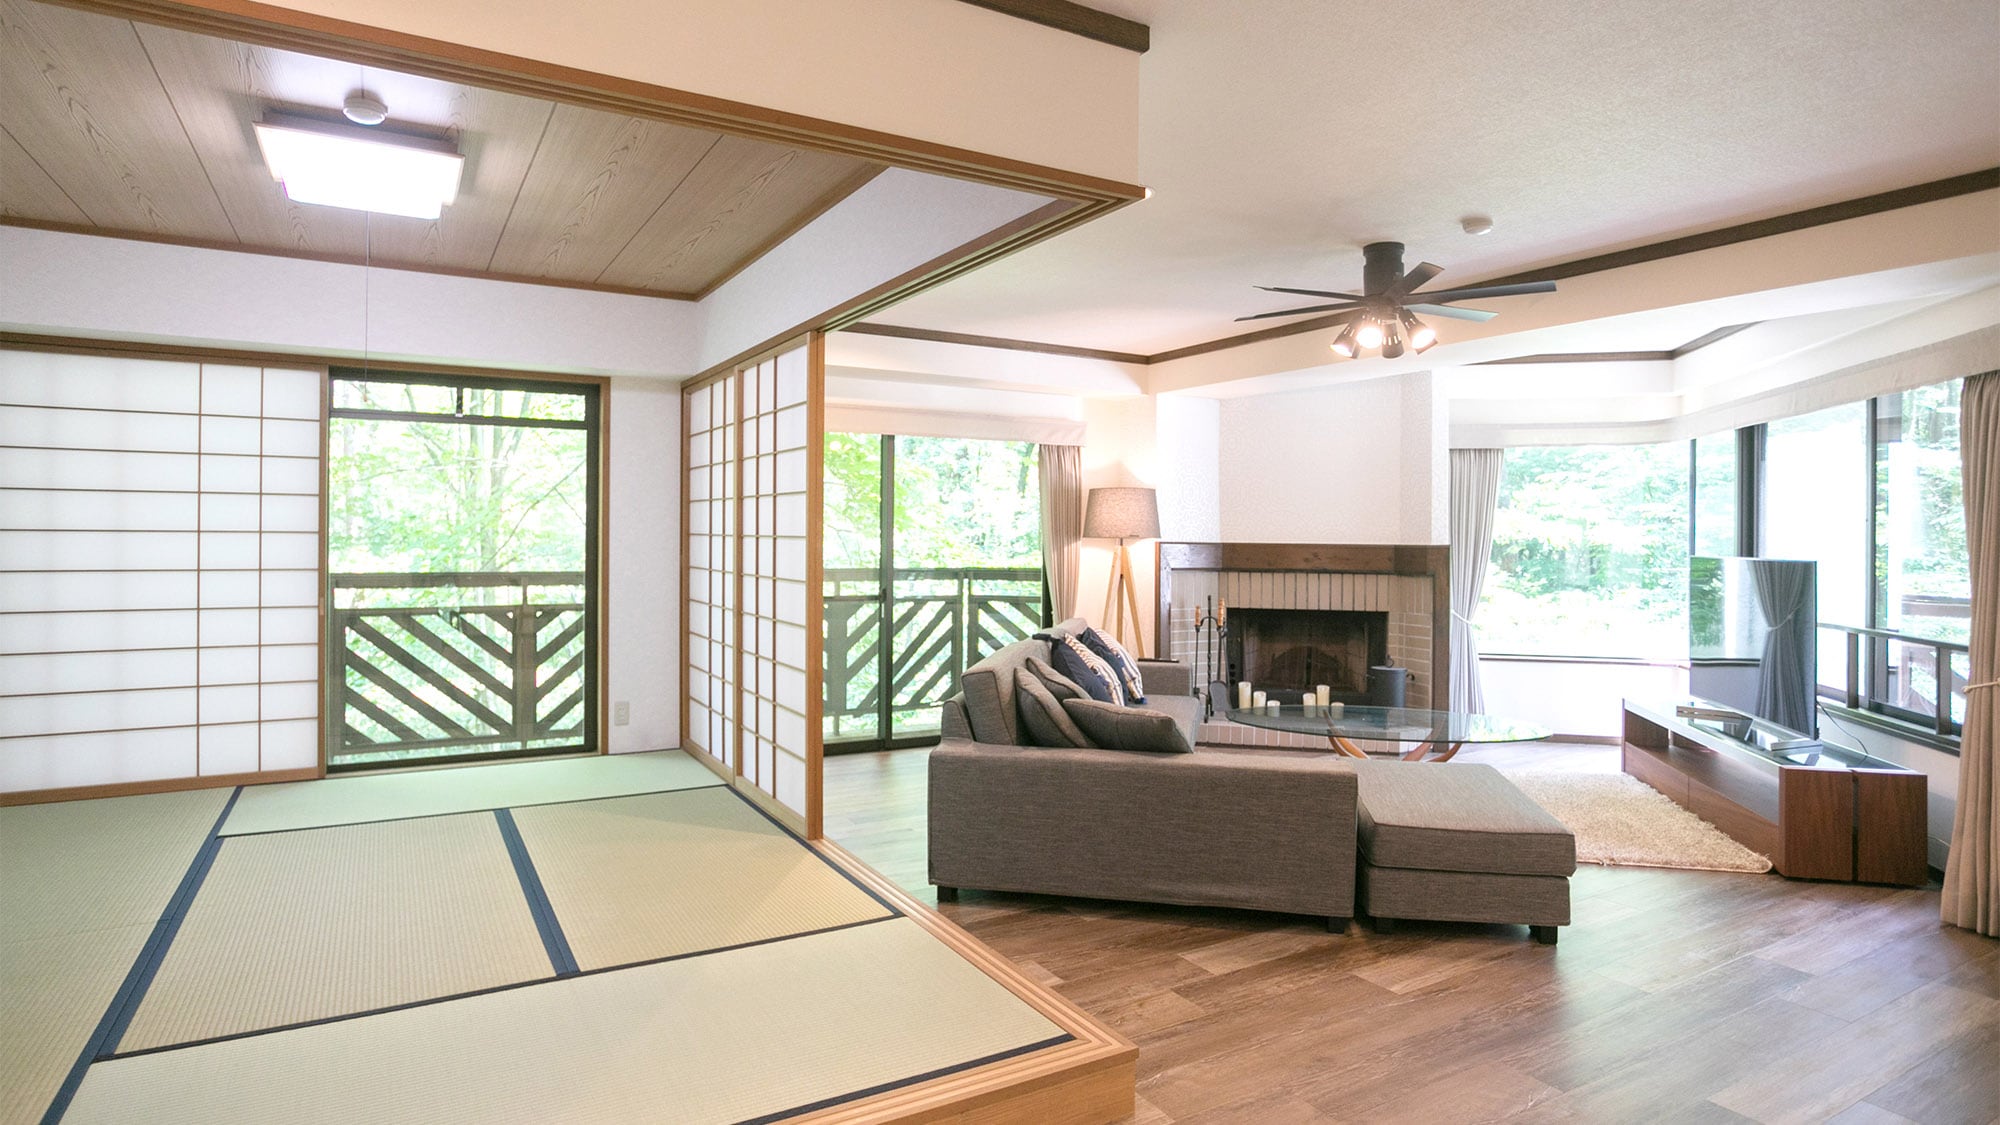 ・ The best of Japanese-style and Western-style rooms